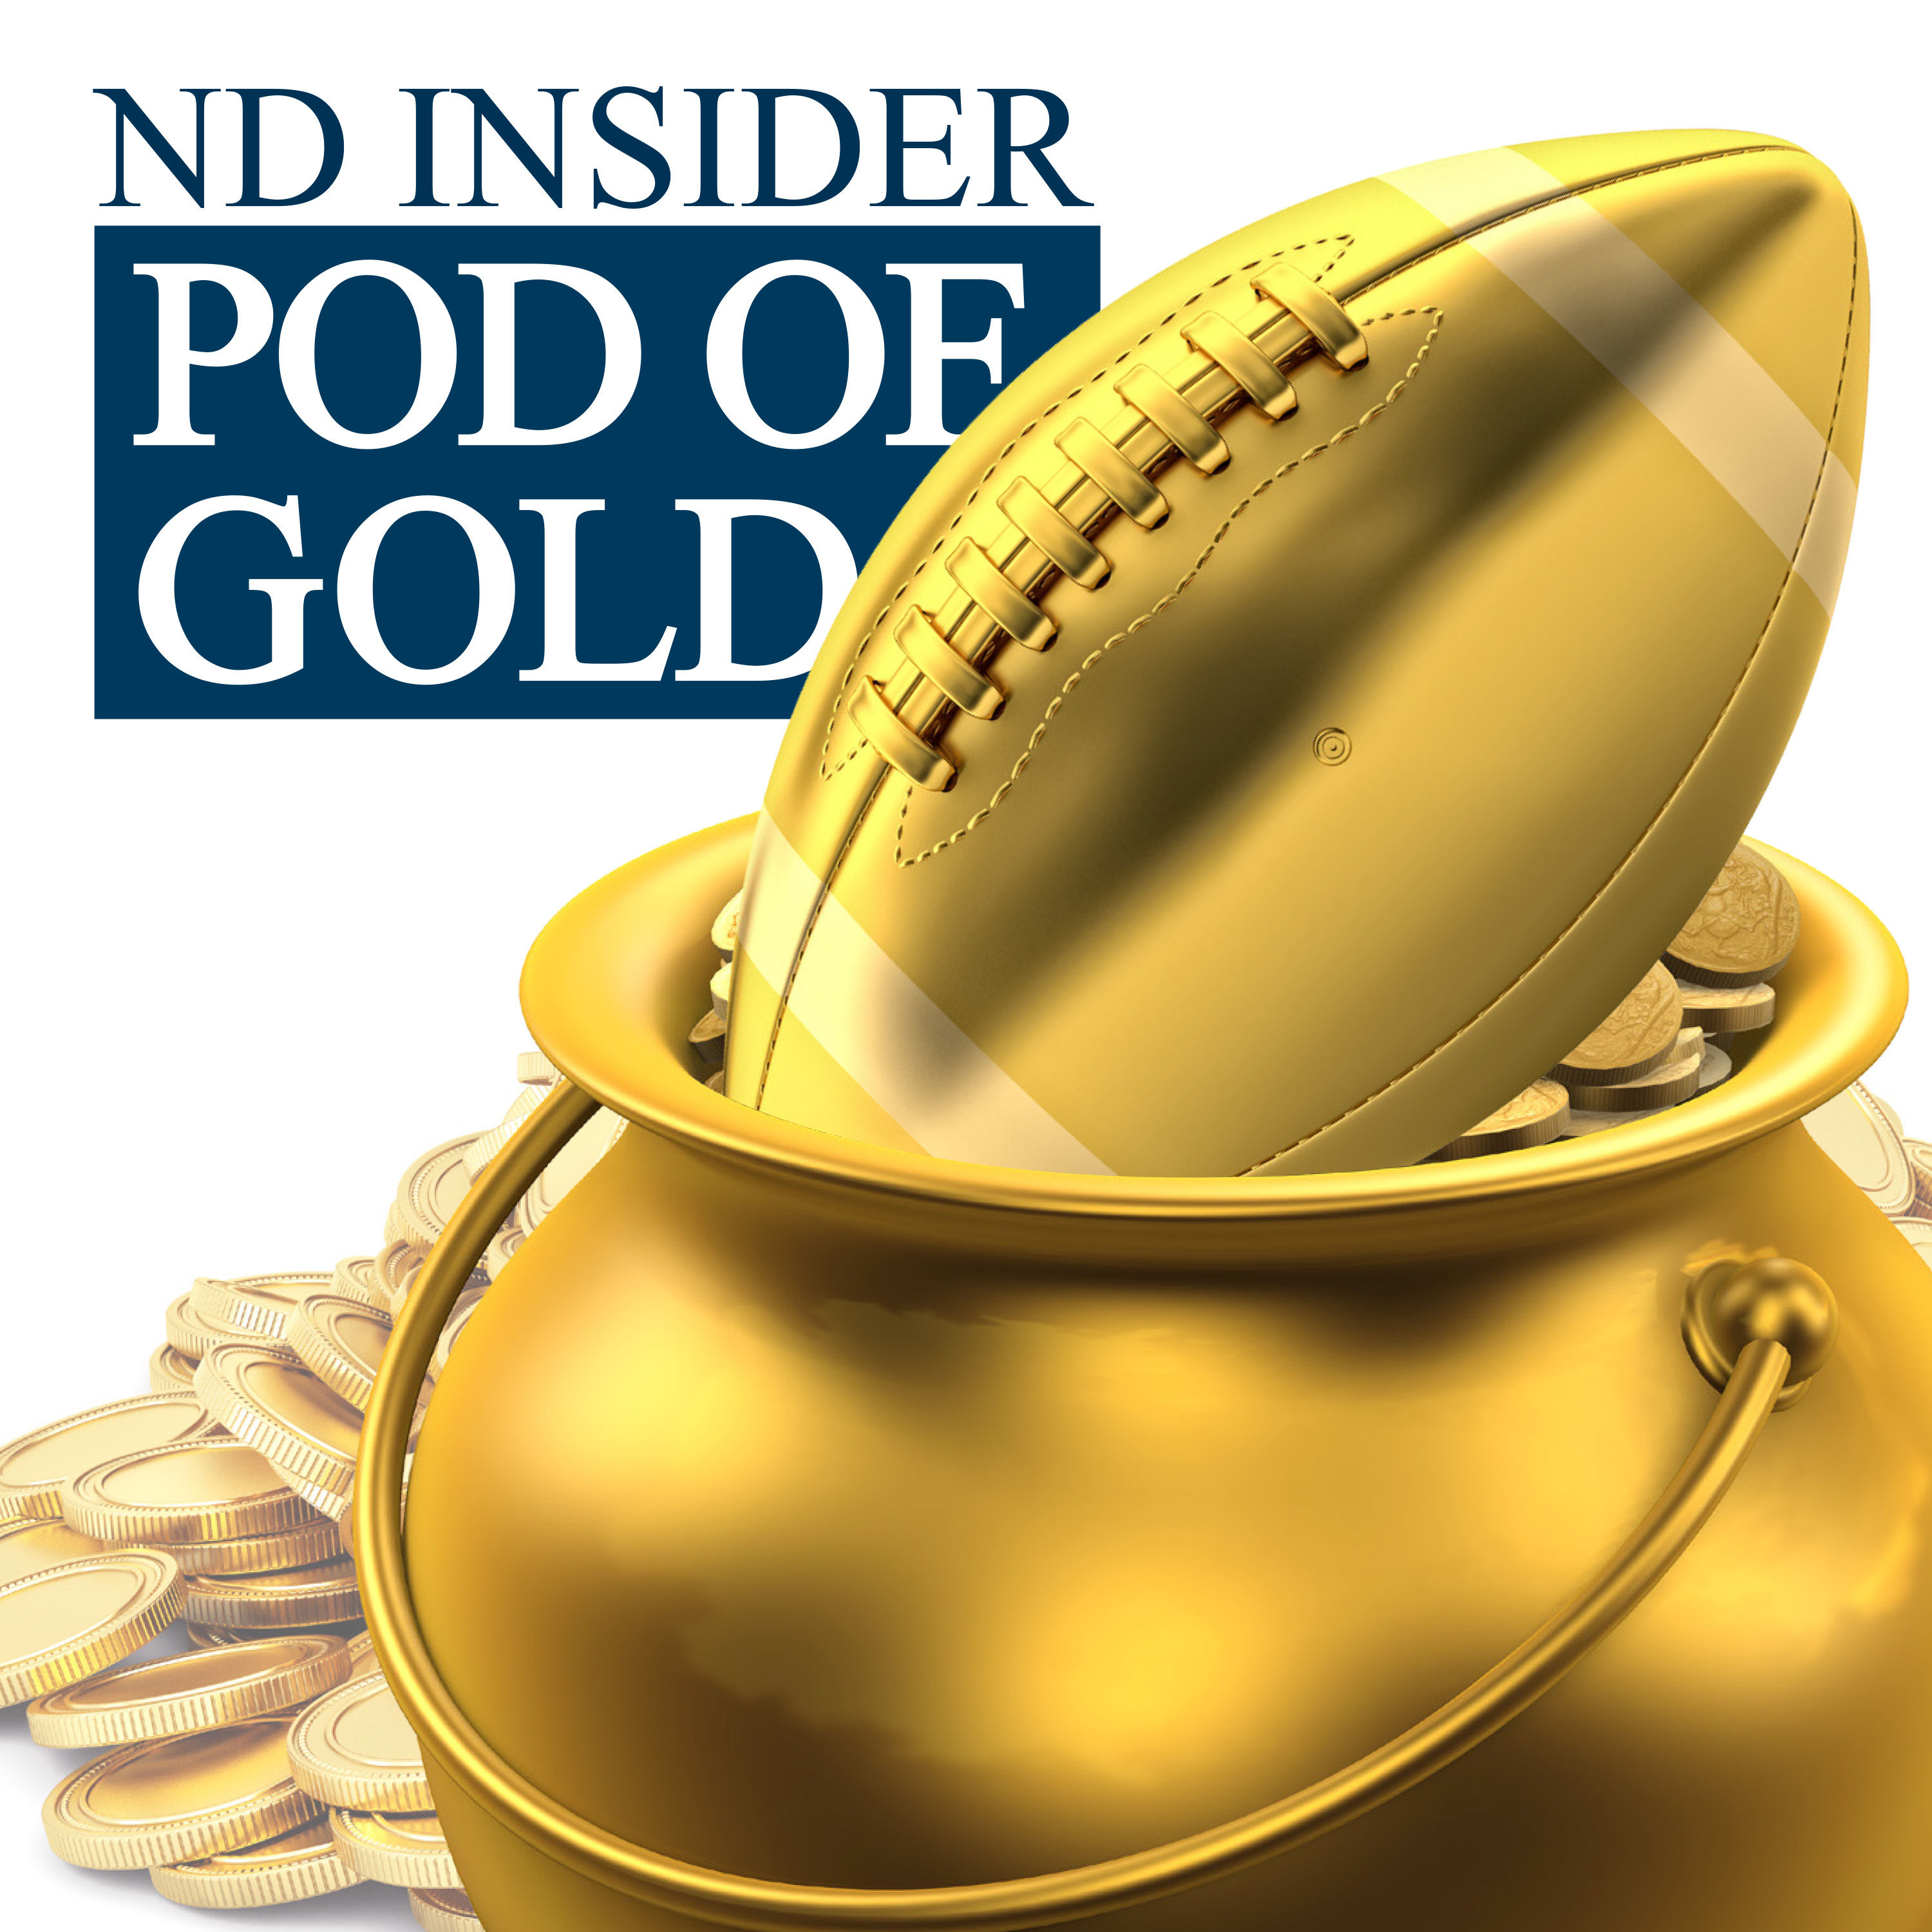 Pod of Gold: Putting the Buckeye debacle to rest and looking ahead to how Notre Dame football beats Duke